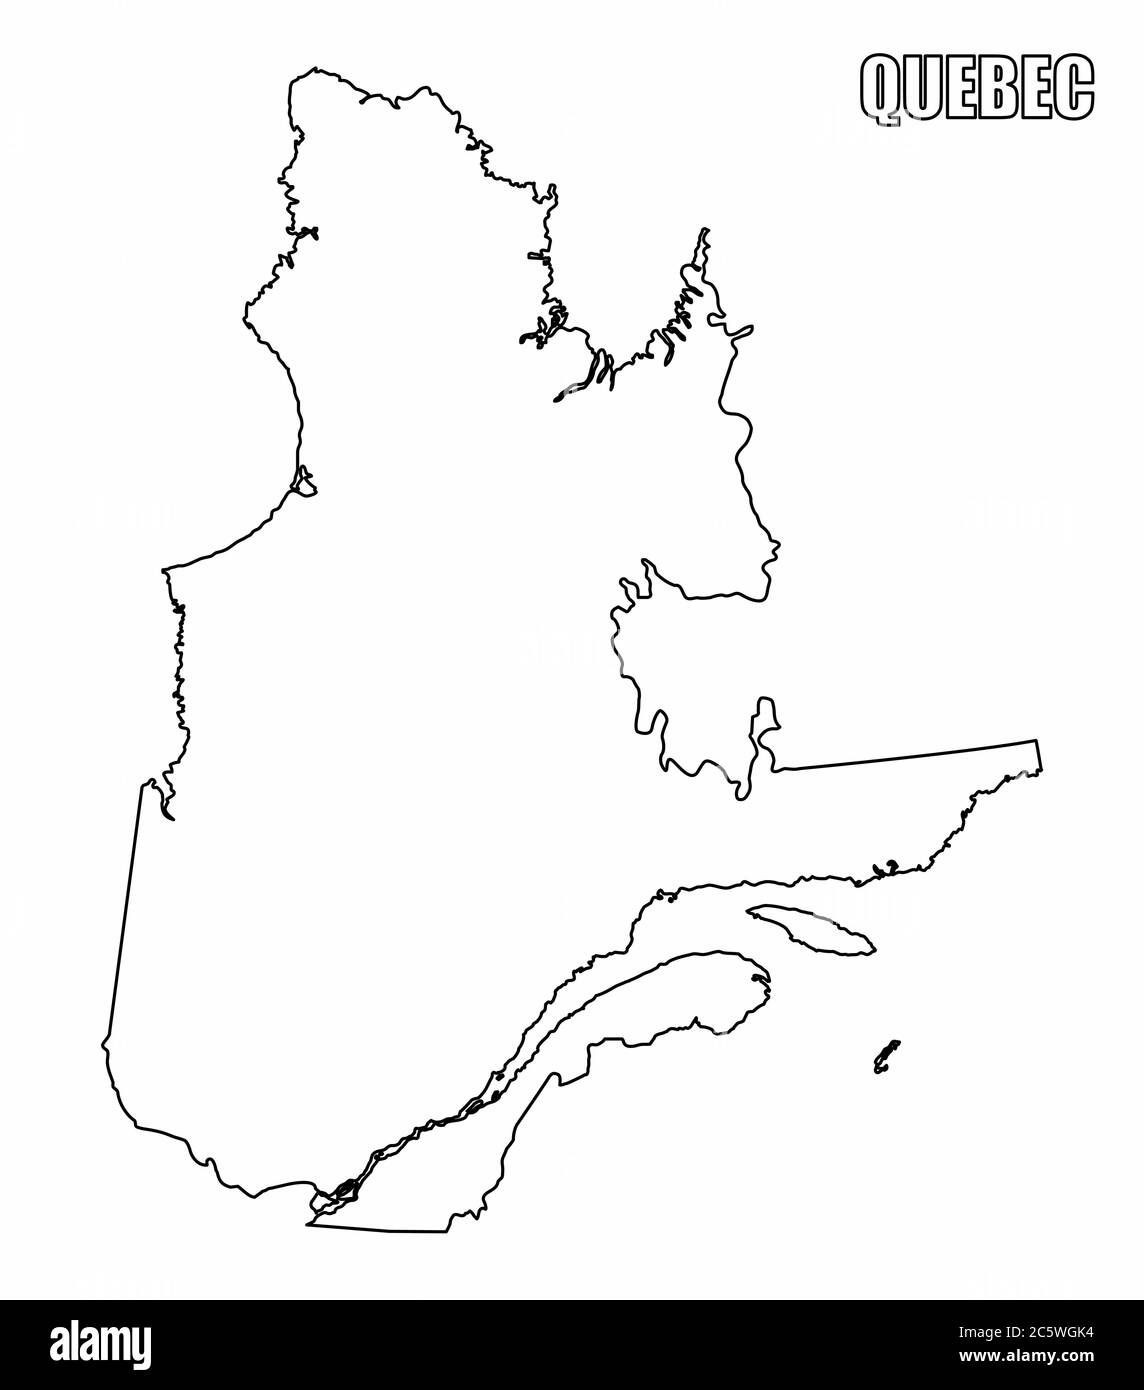 Quebec province outline map Stock Vector